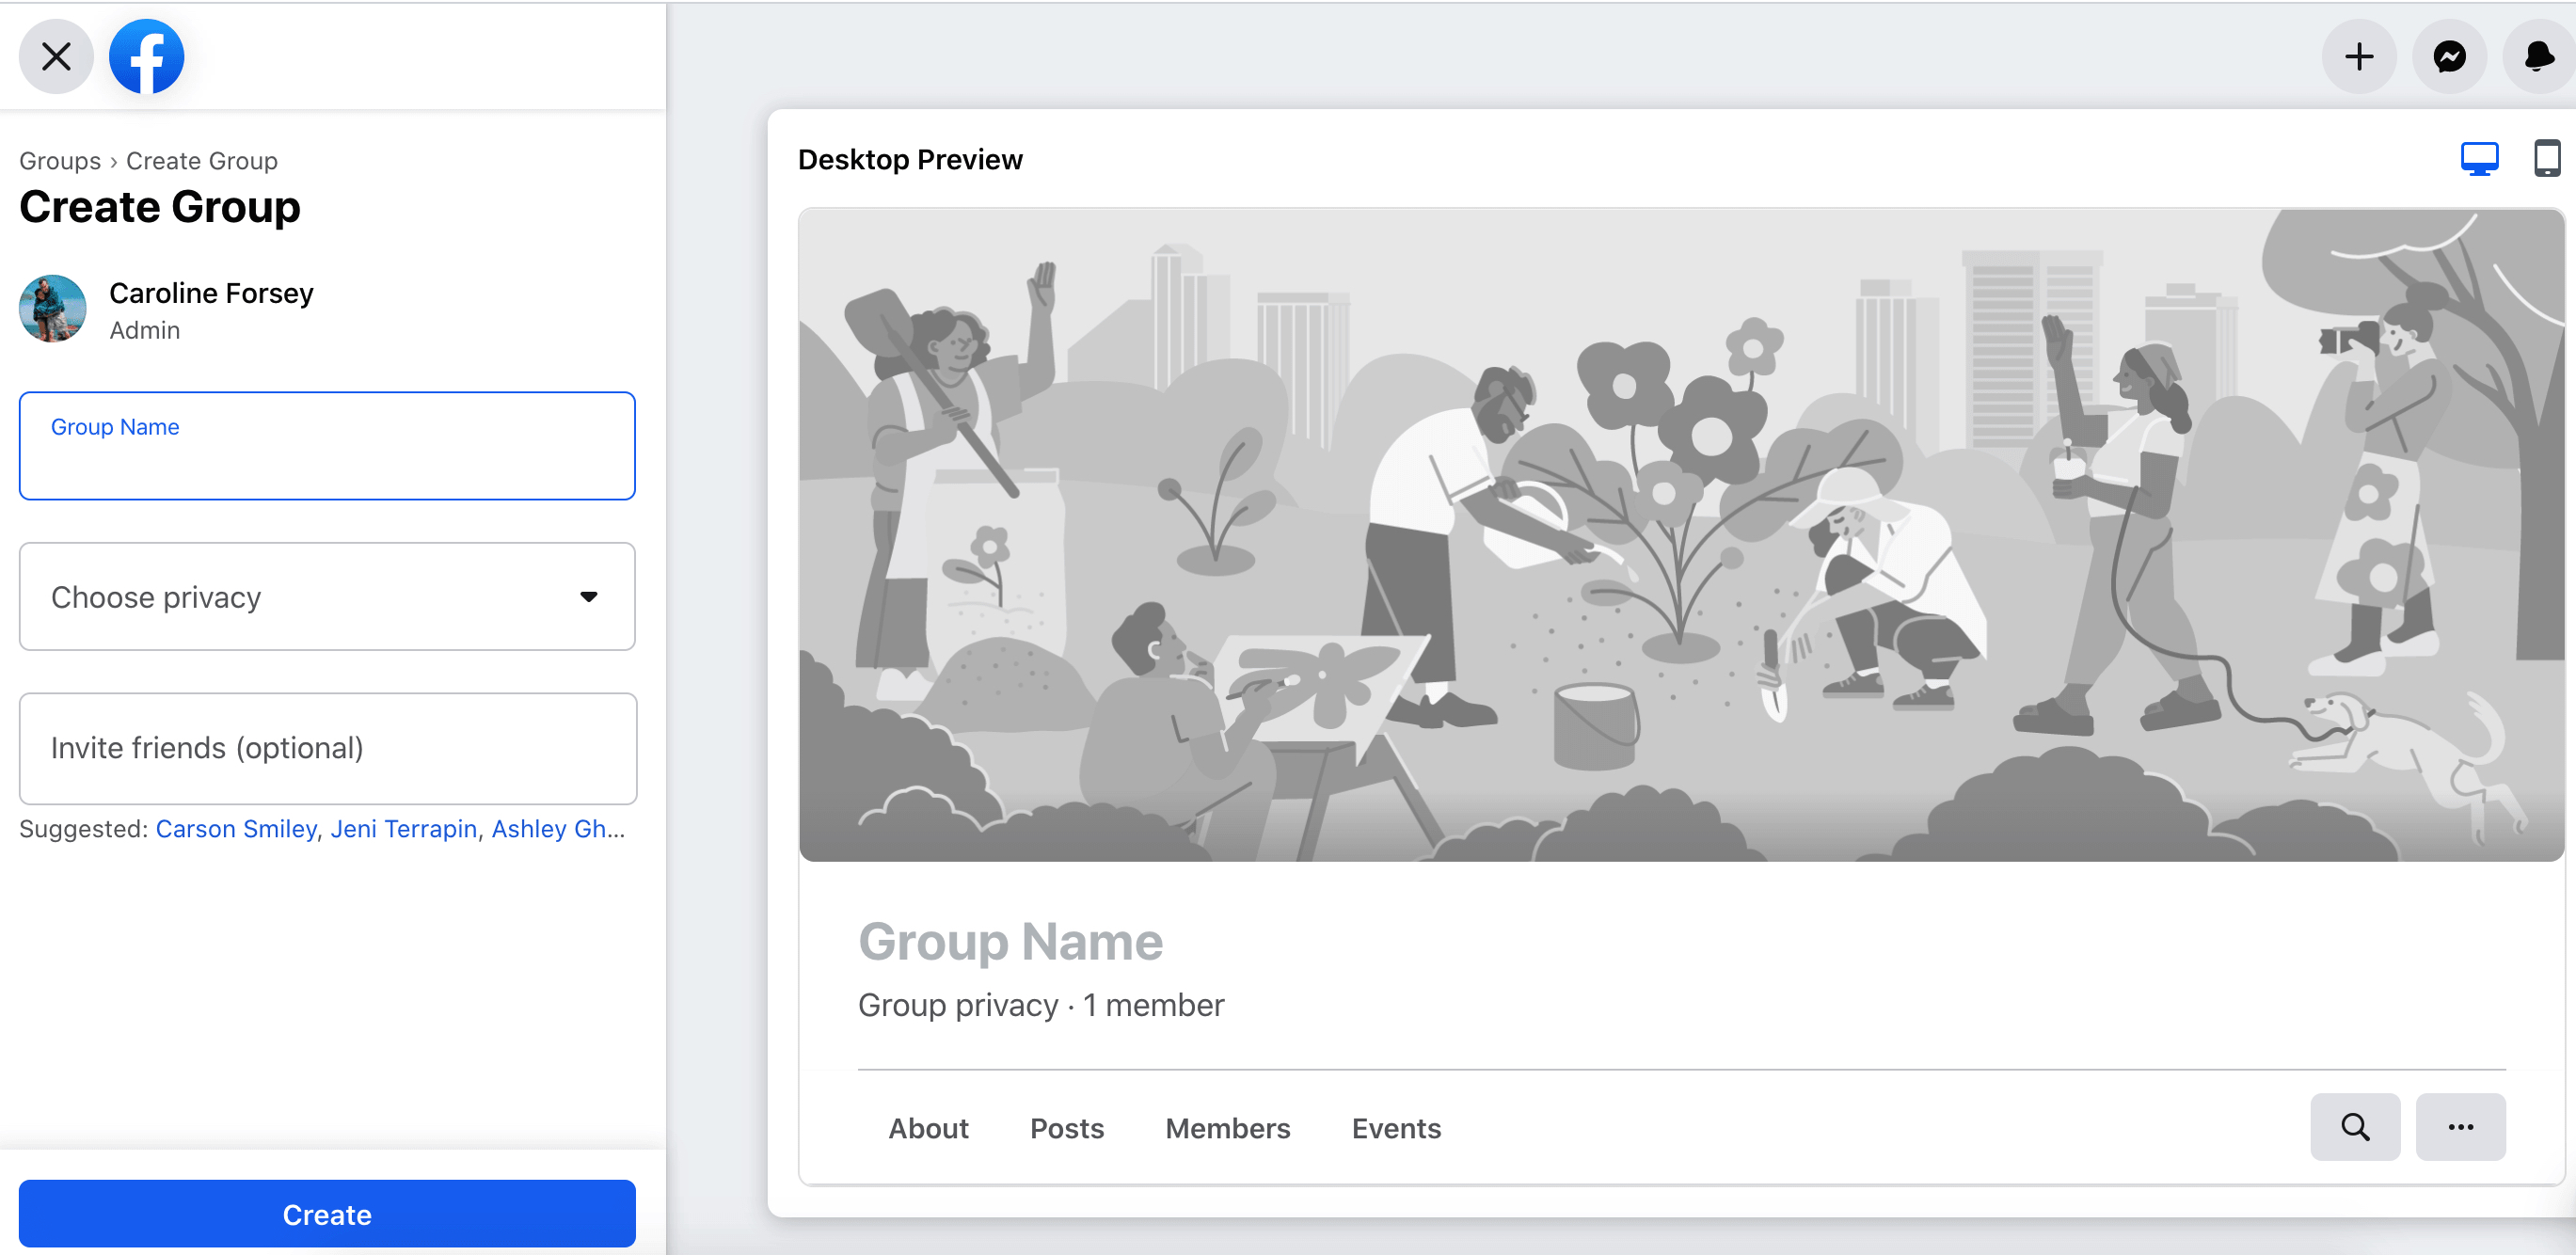 how to pin a document in a facebook group